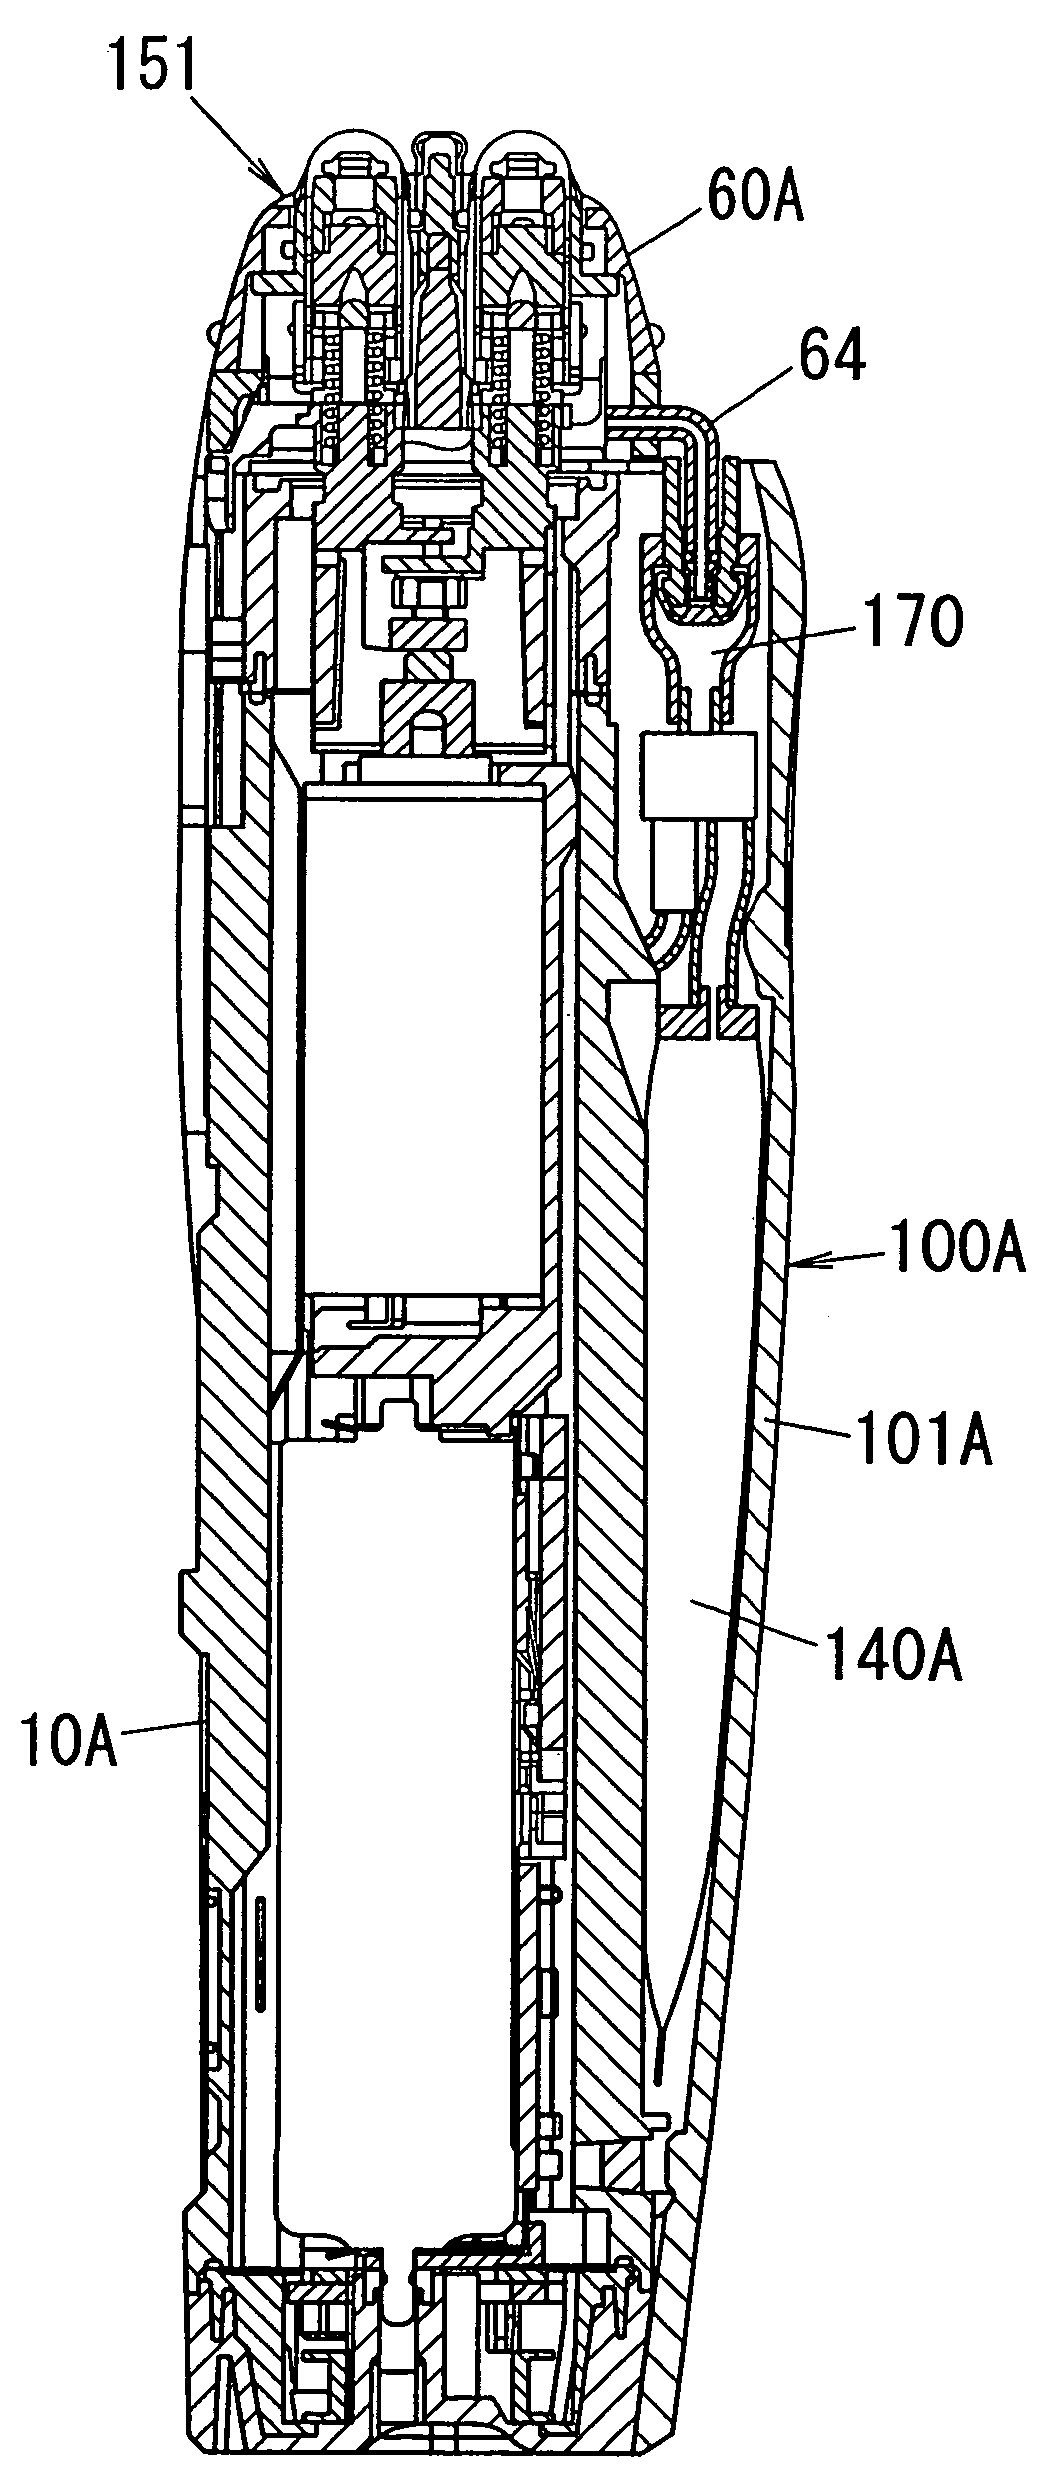 Hair removing device with a lotion applicator